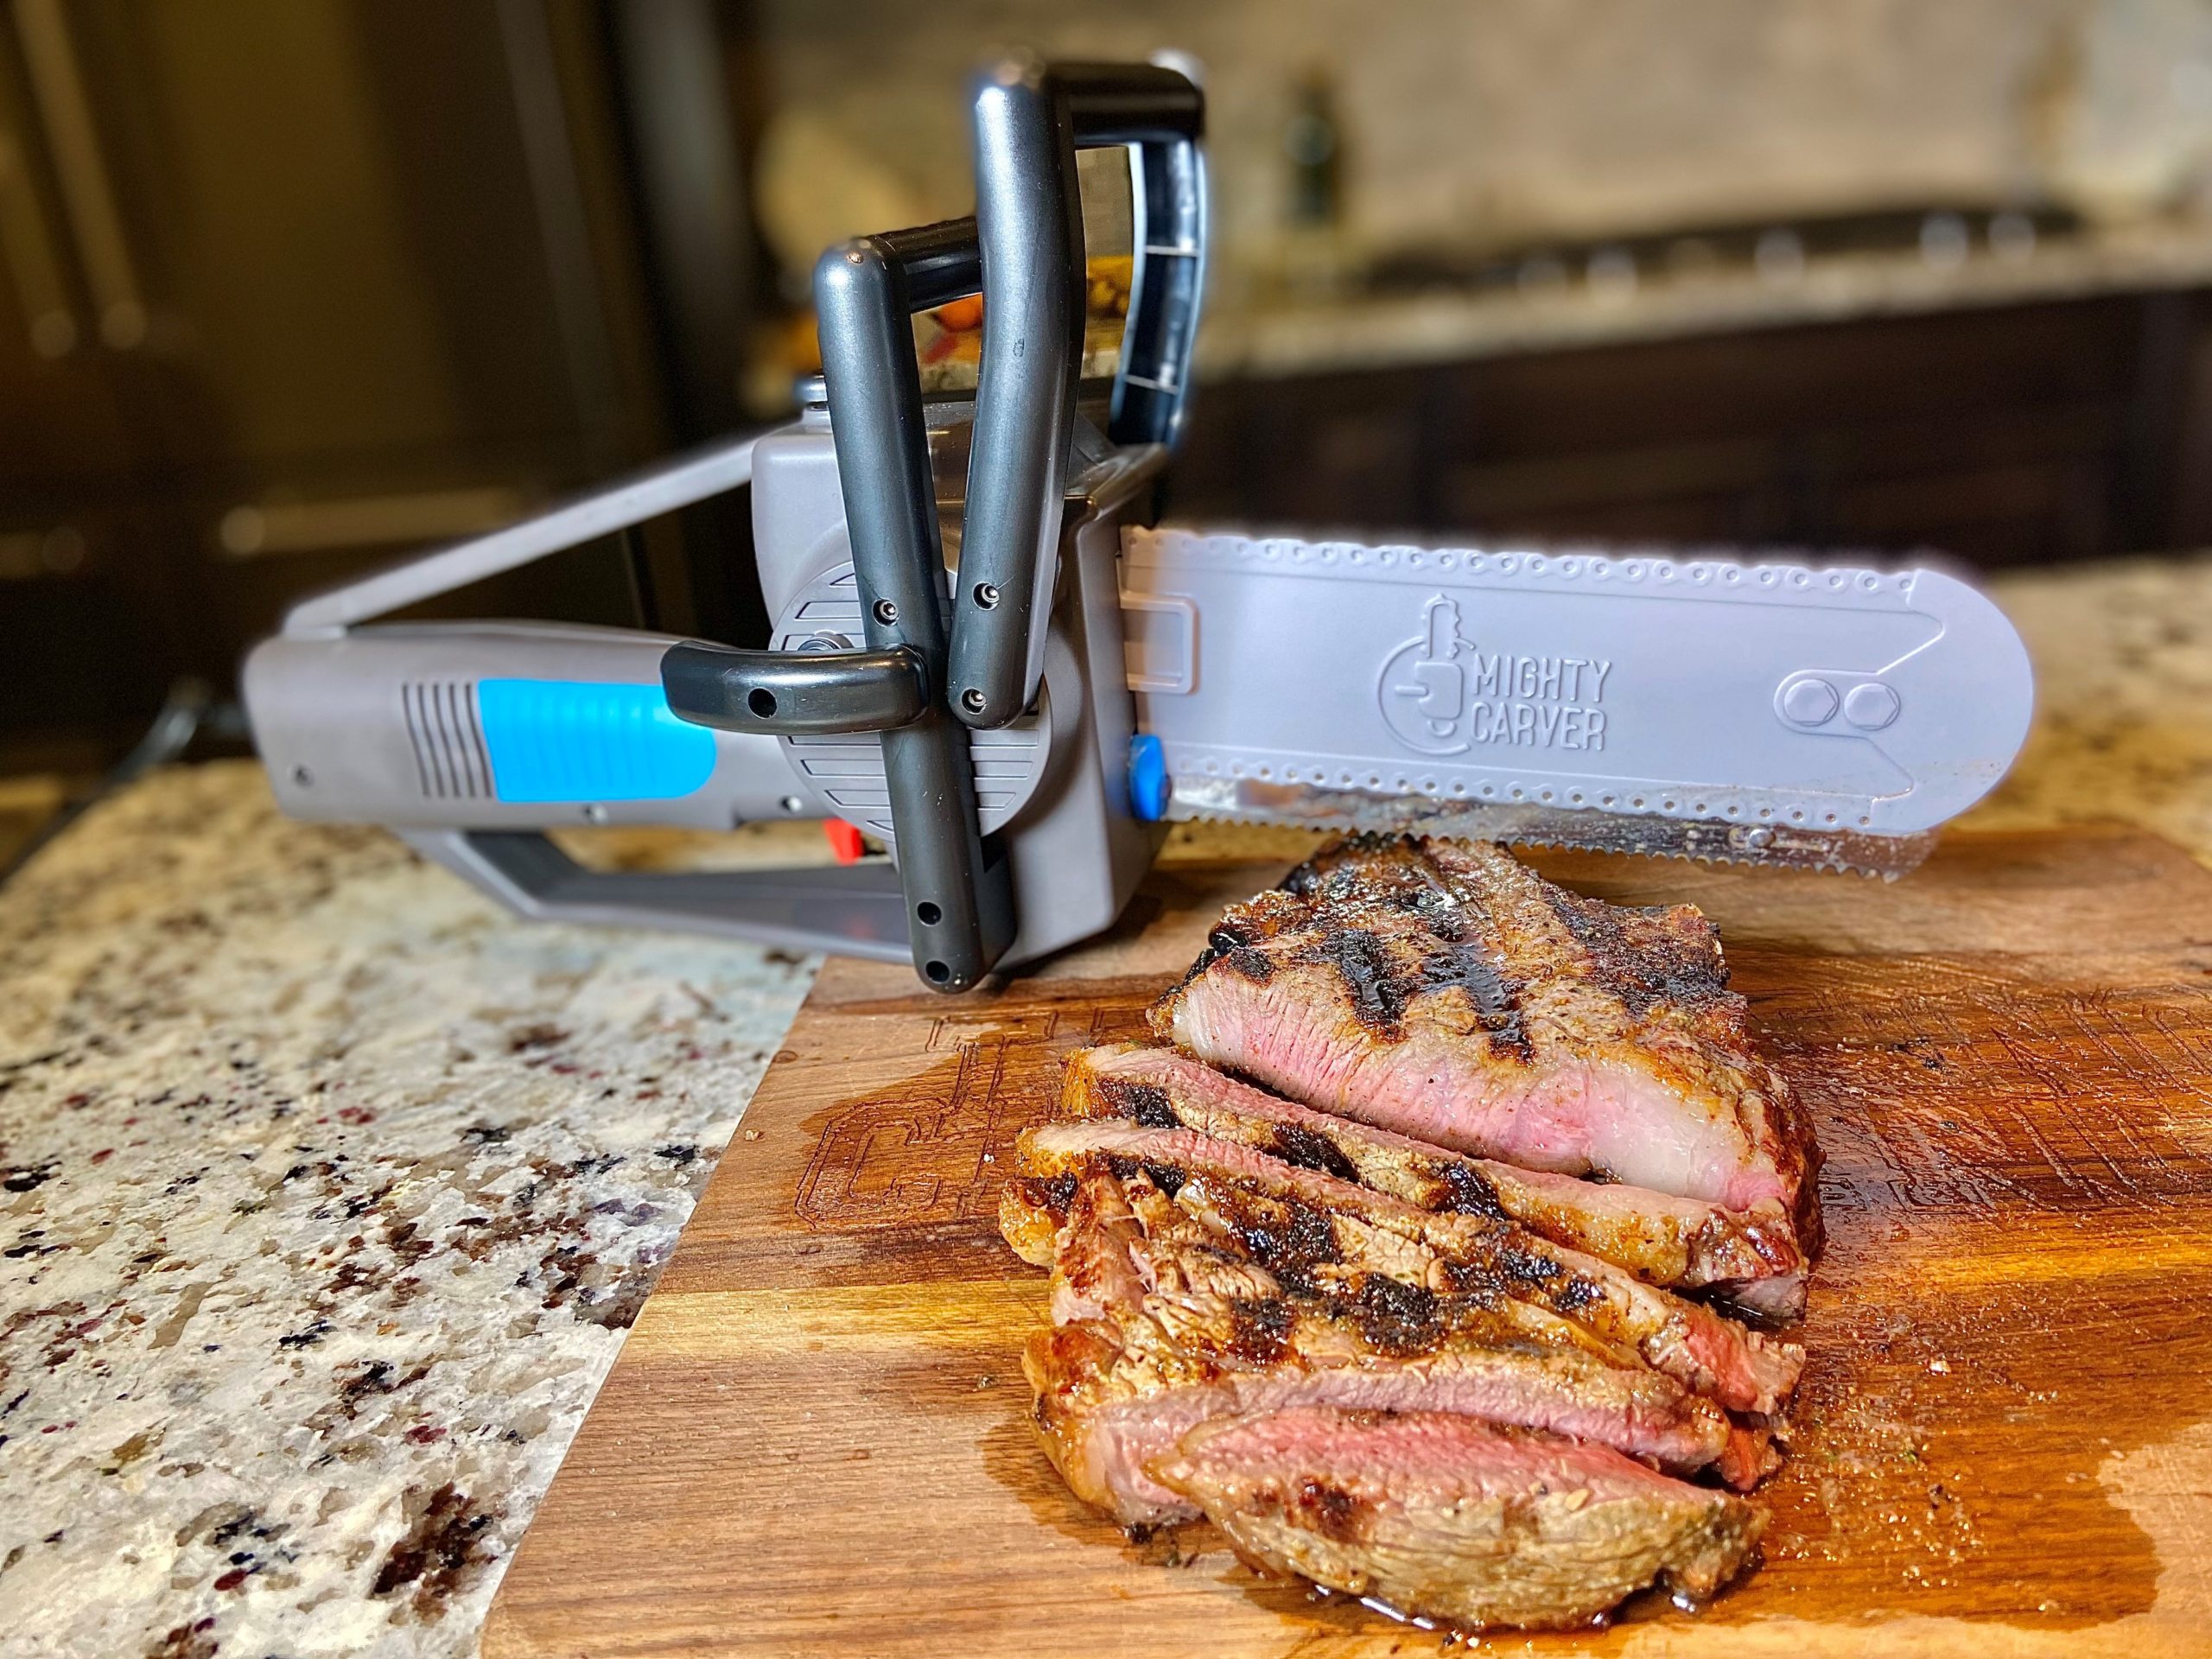 5 Things to Know About the MIGHTY CARVER Electric Carving Knife 